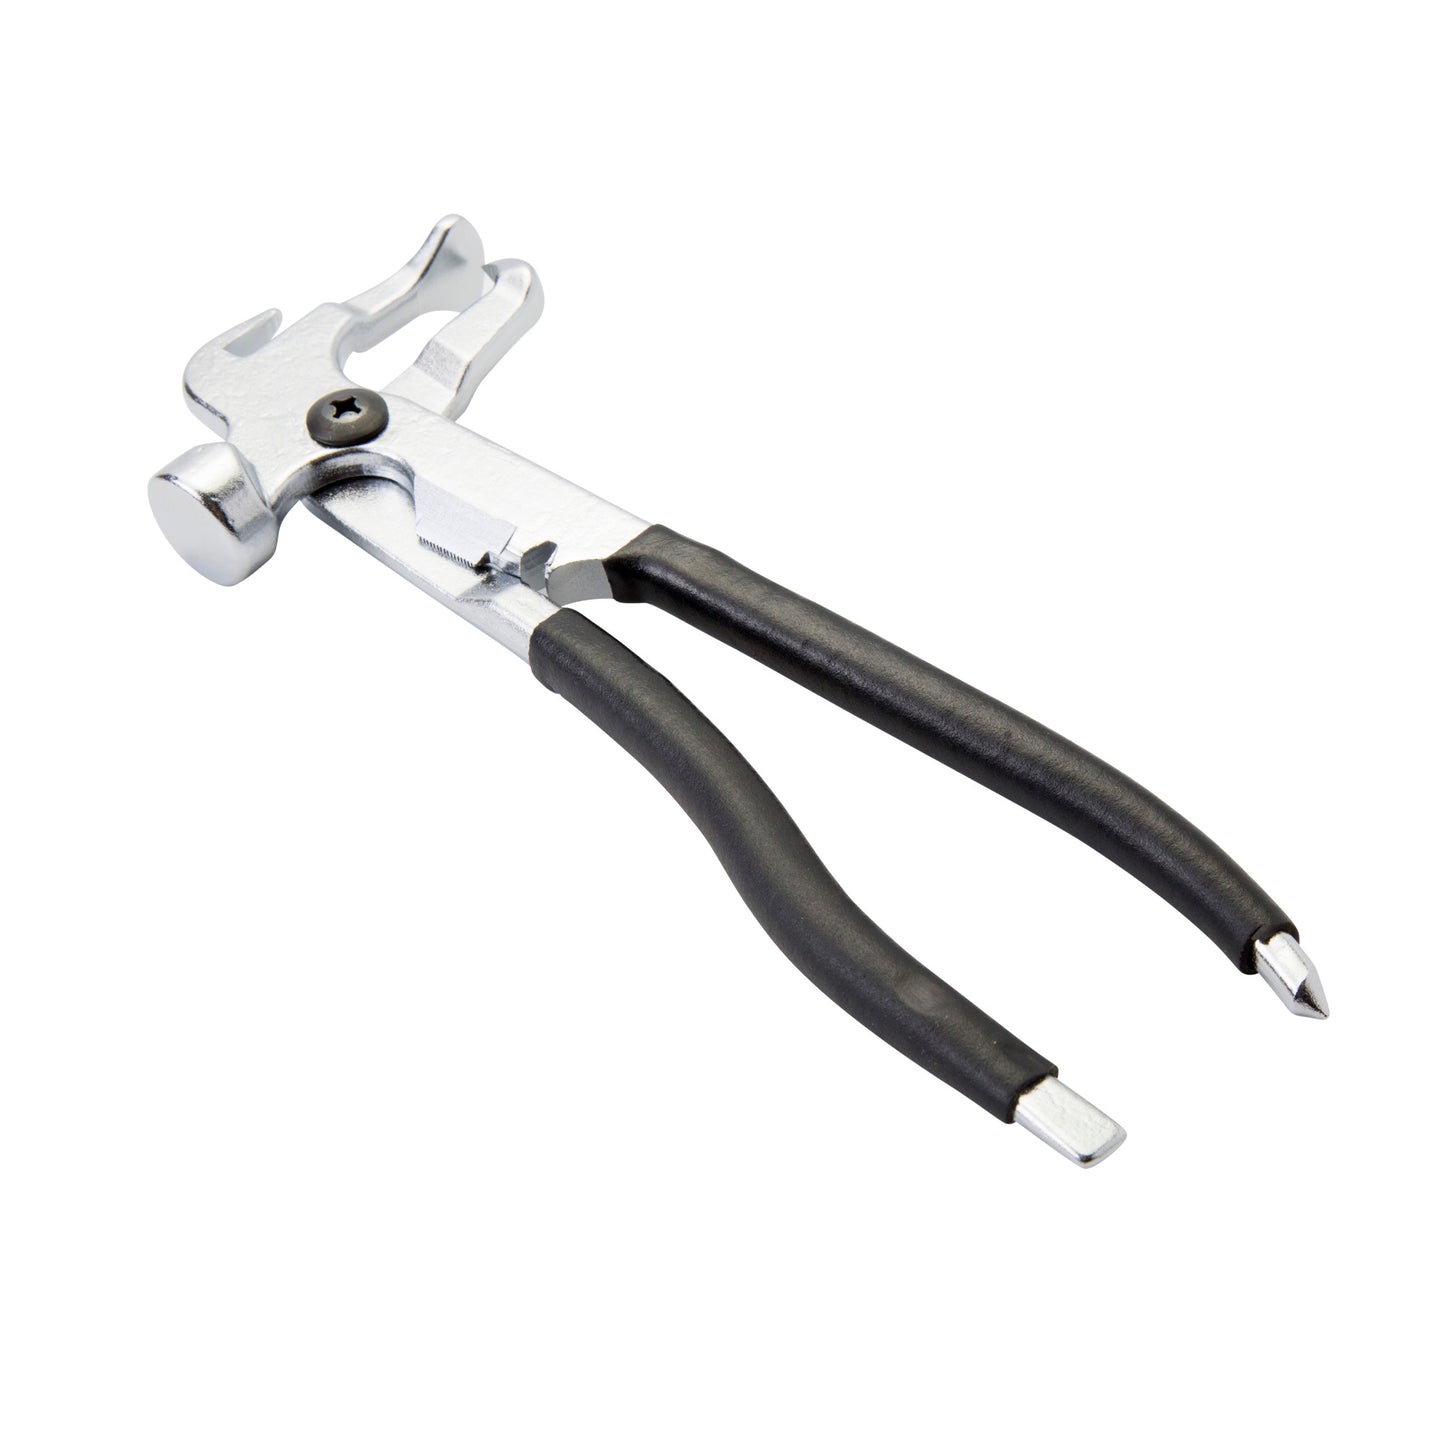 The STEELMAN Wheel Weight Hammer features a hook and paddle/spike jaw to provide extra leverage when removing weights. The cutting blade and notch trim down and bend wheel weights. The handles feature a point for releasing tire pressure.